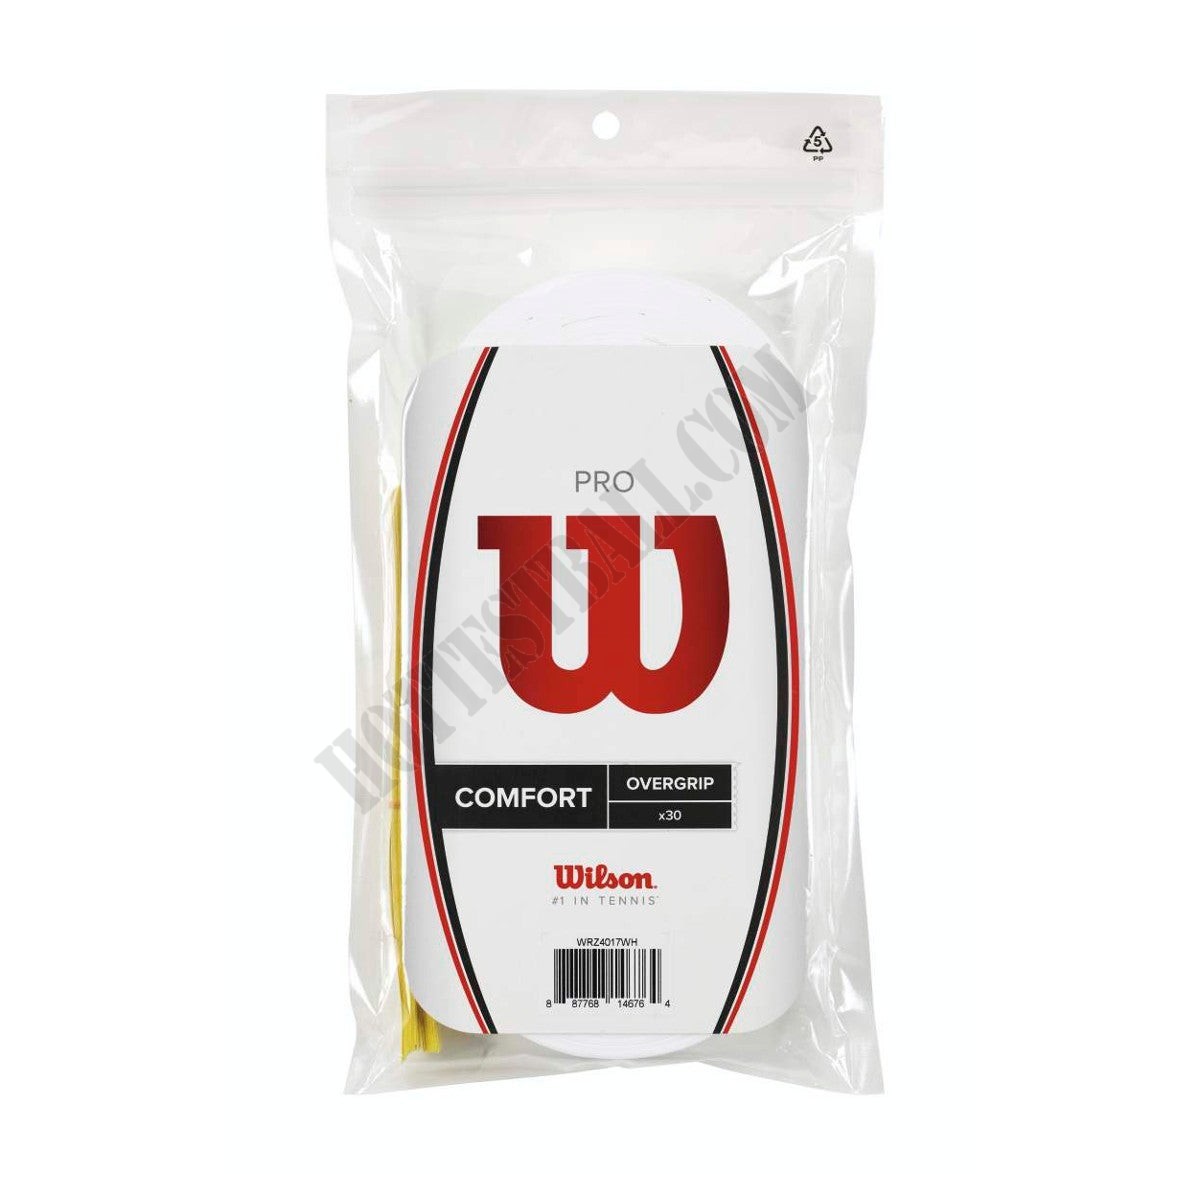 Pro Overgrip White - 30 Pack - Wilson Discount Store - Pro Overgrip White - 30 Pack - Wilson Discount Store